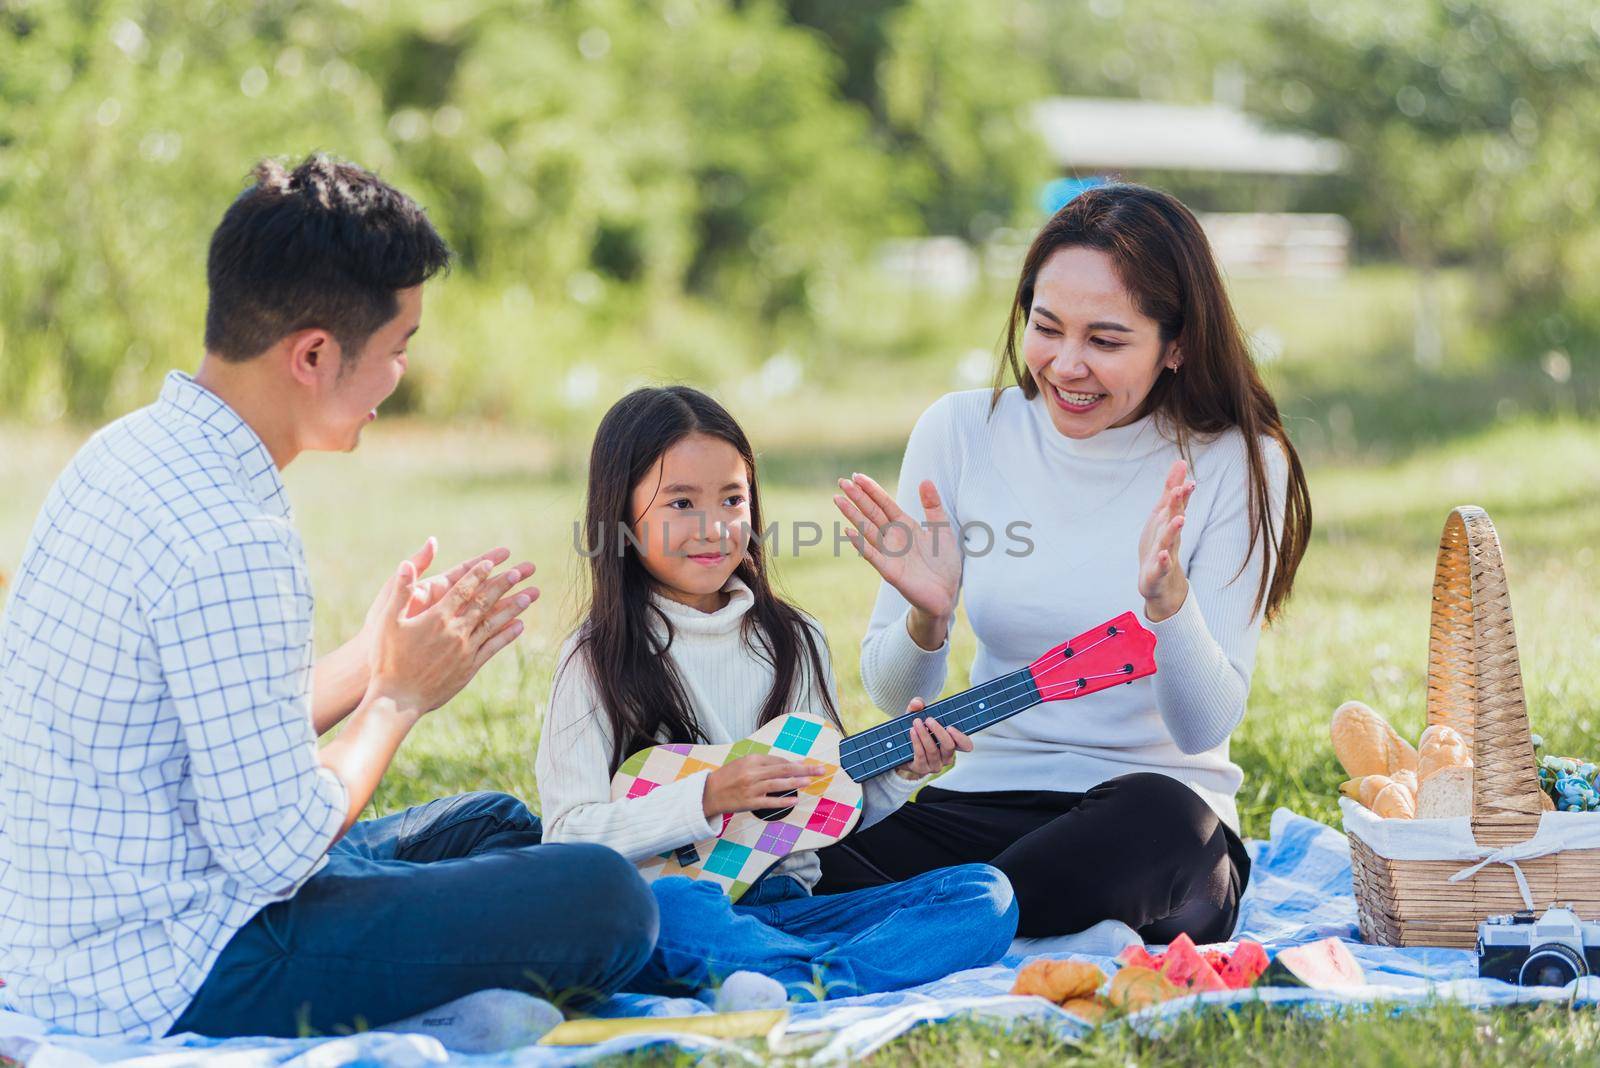 Happy family having fun and enjoying outdoor with playing Ukulele during a picnic by Sorapop